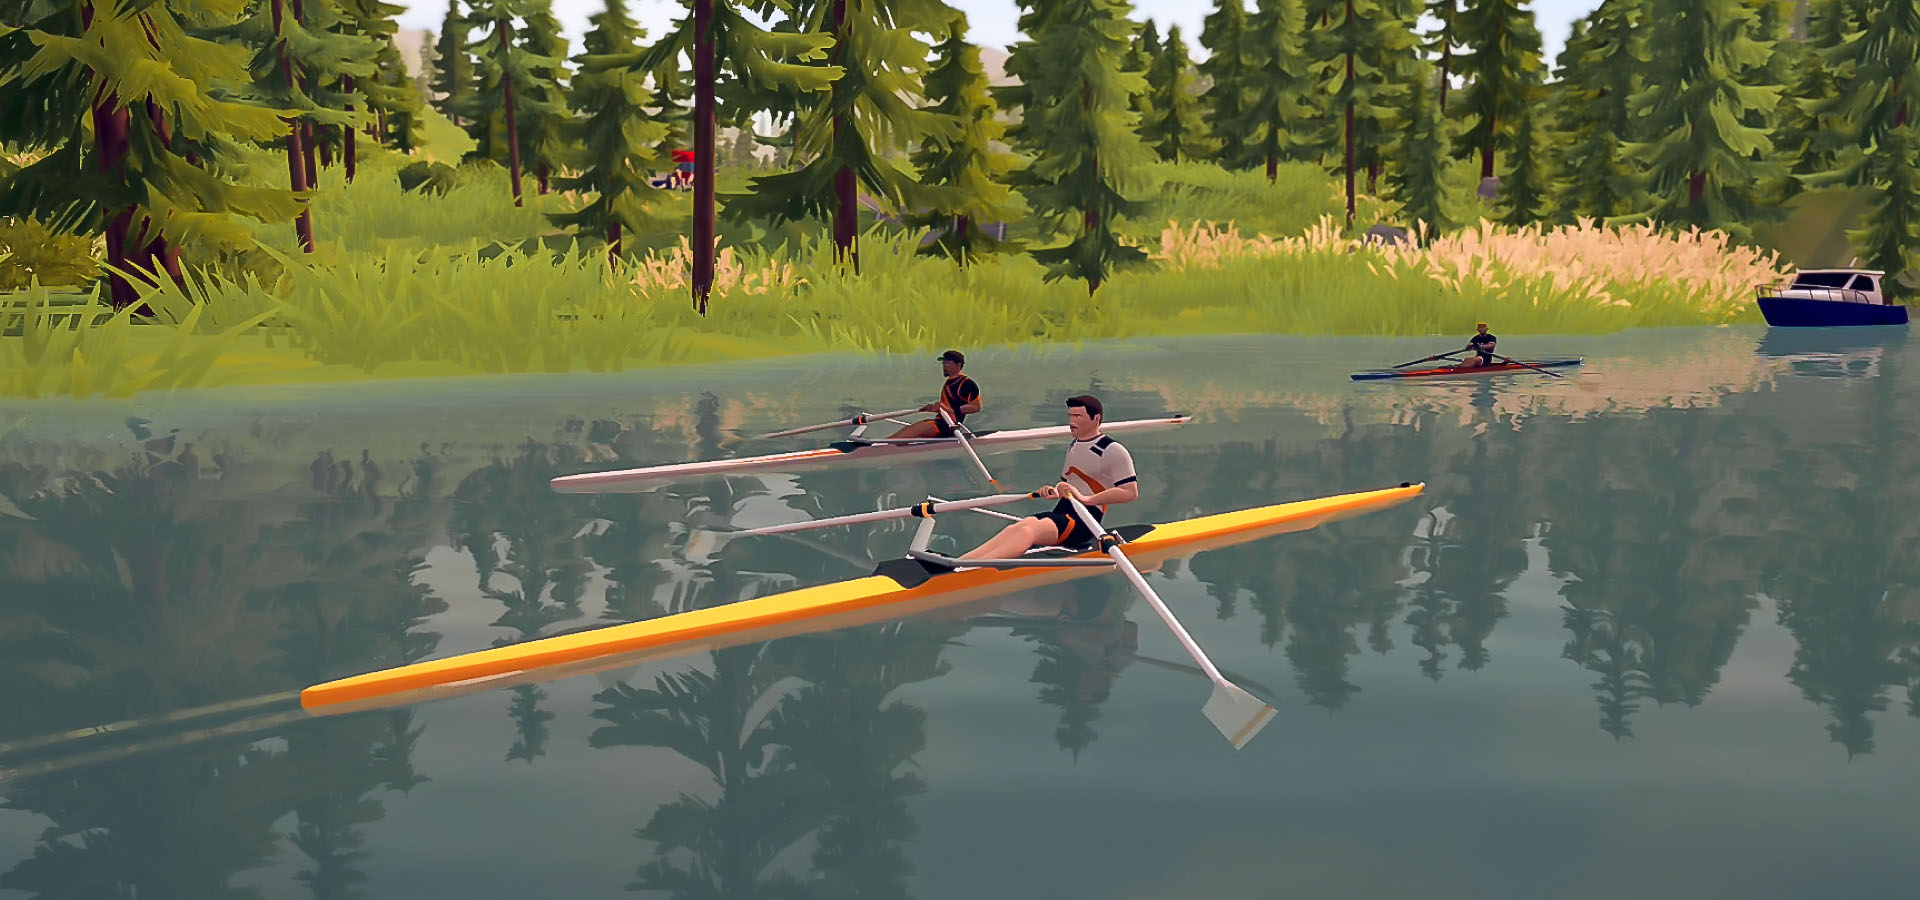 Image of 3 men rowing together